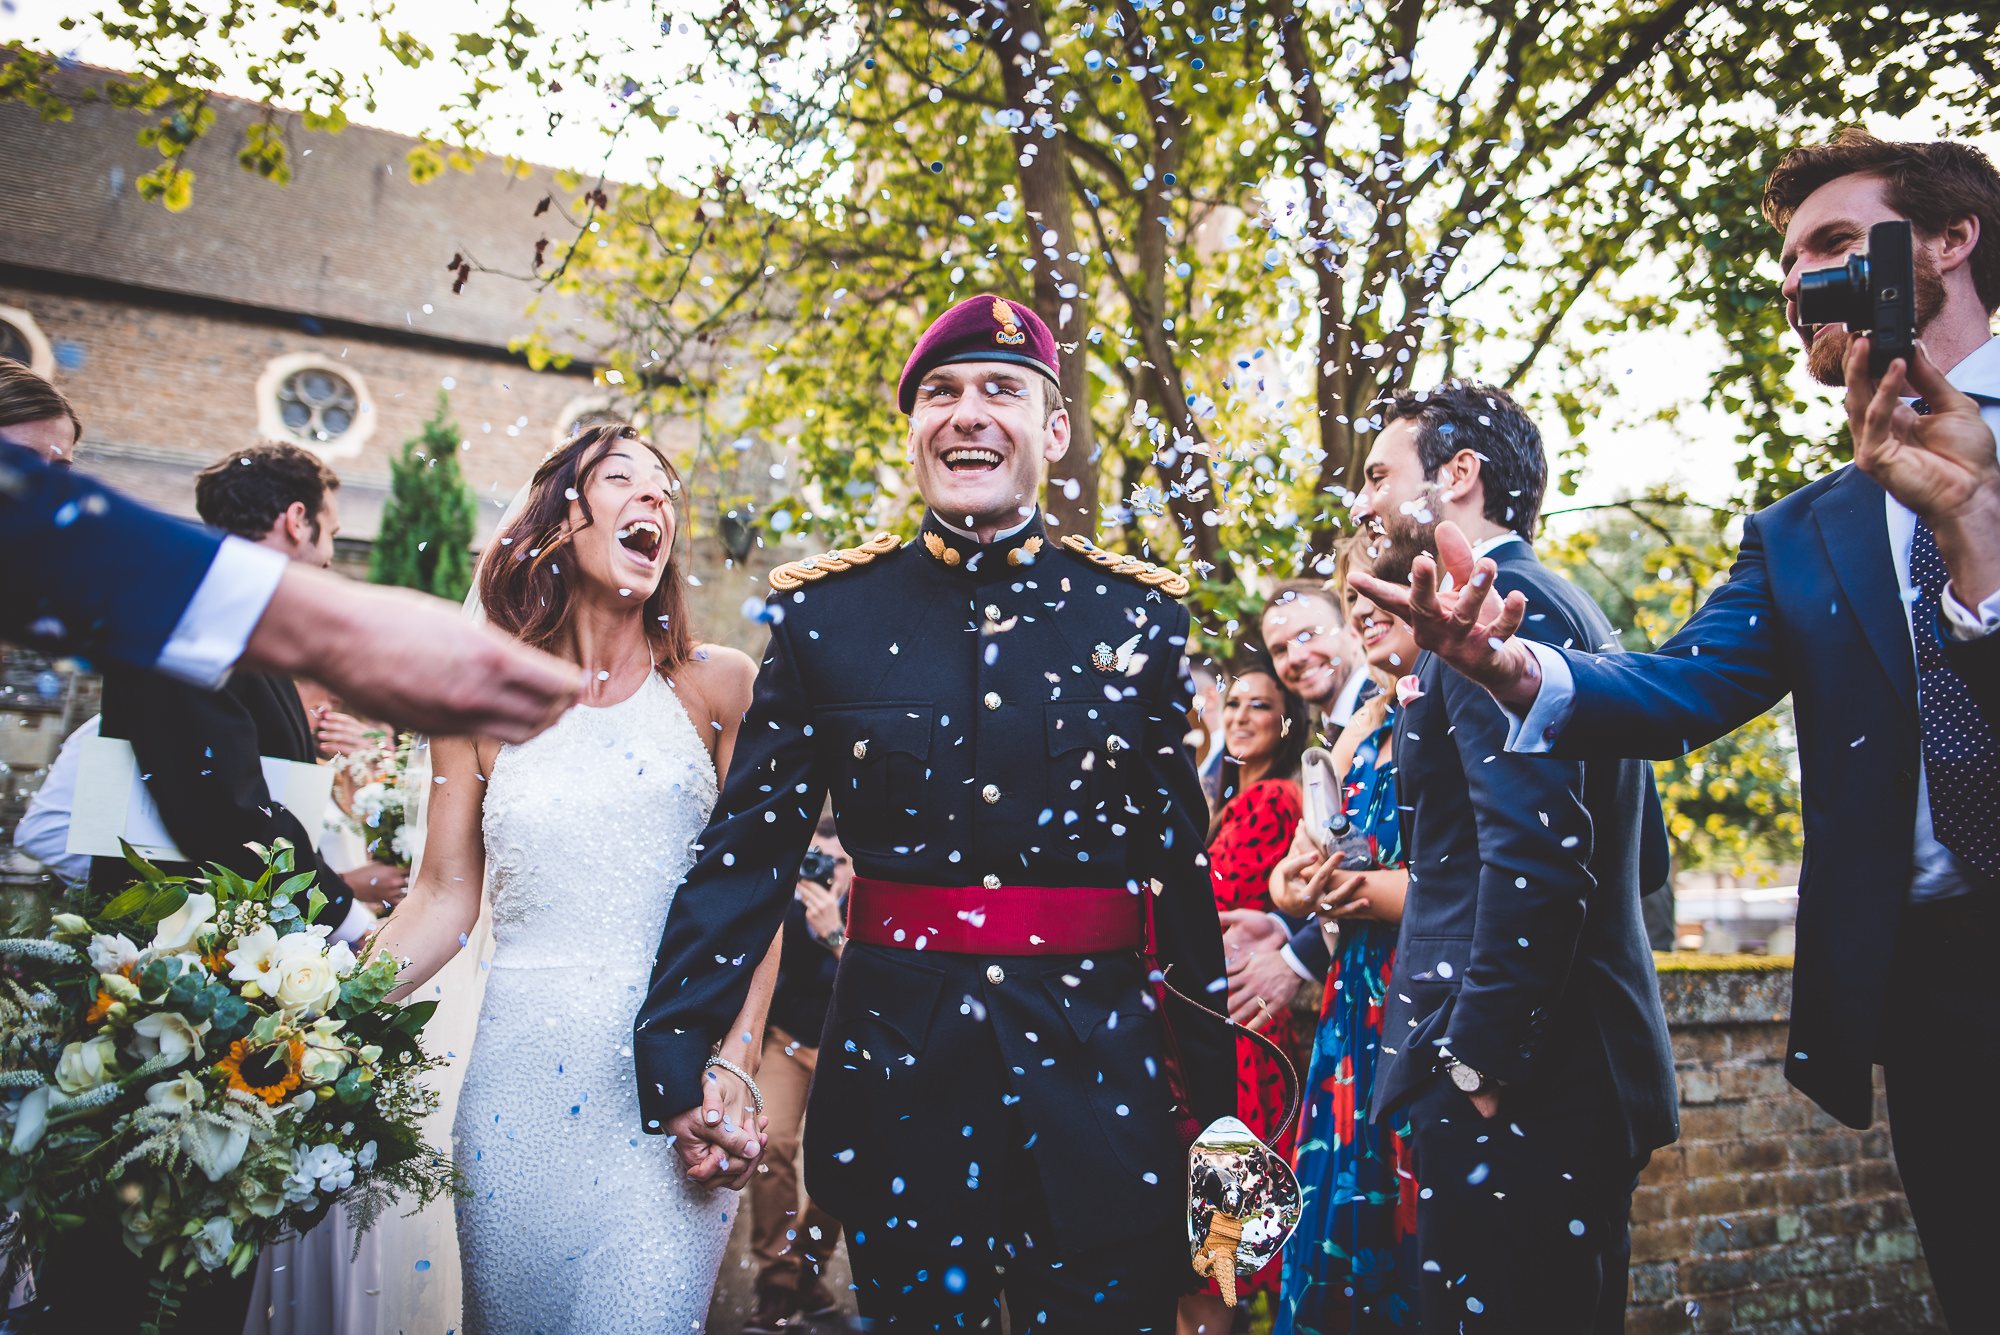 A wedding photo of a bride and groom walking down the aisle with confetti thrown at them.